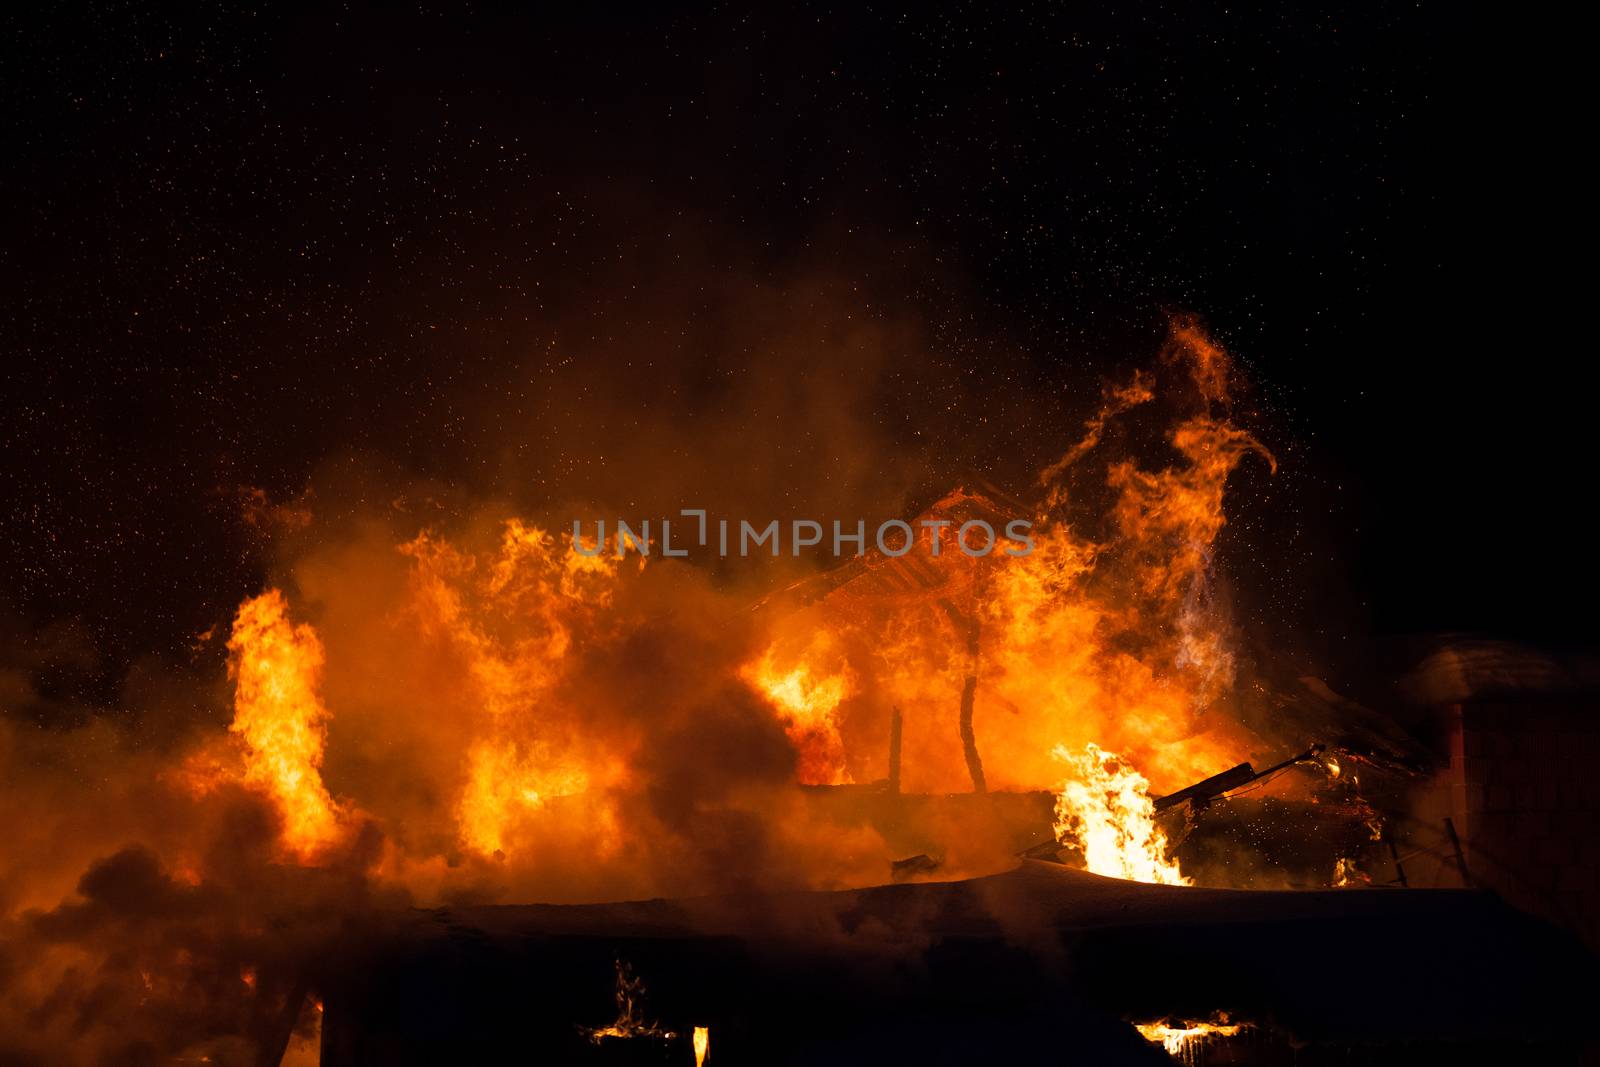 Burning fire flame on wooden house roof by ia_64